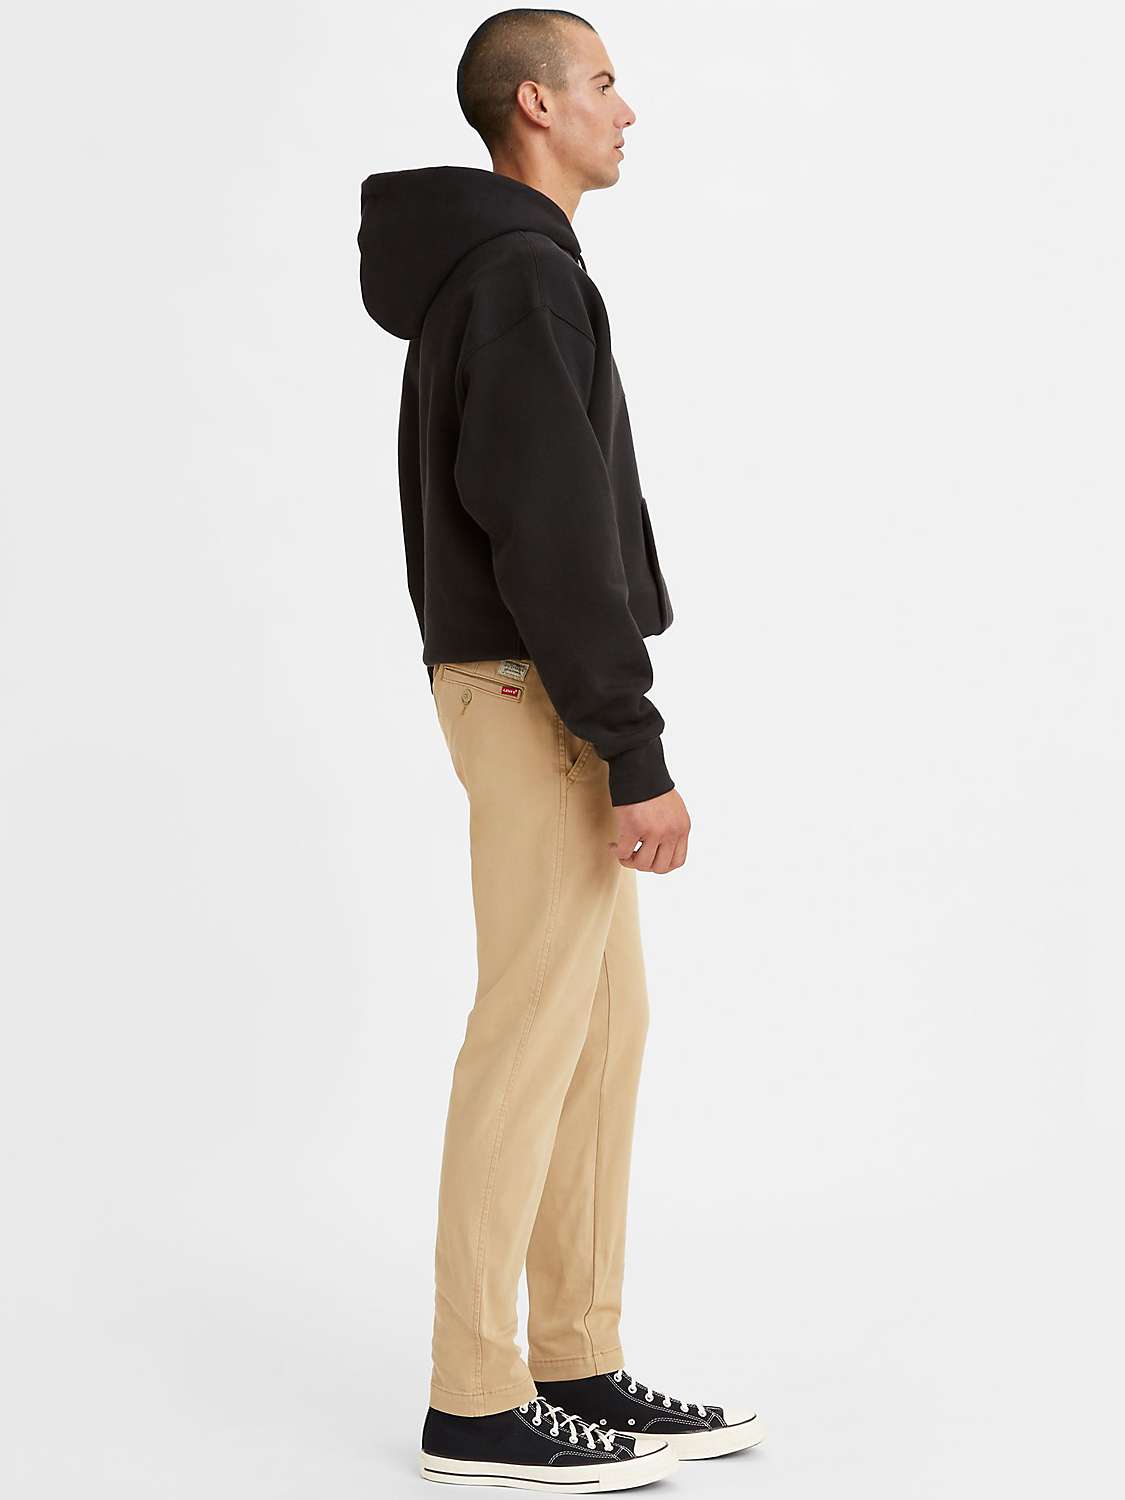 Buy Levi's Regular Fit Chinos, True Chino GDCCUB Online at johnlewis.com